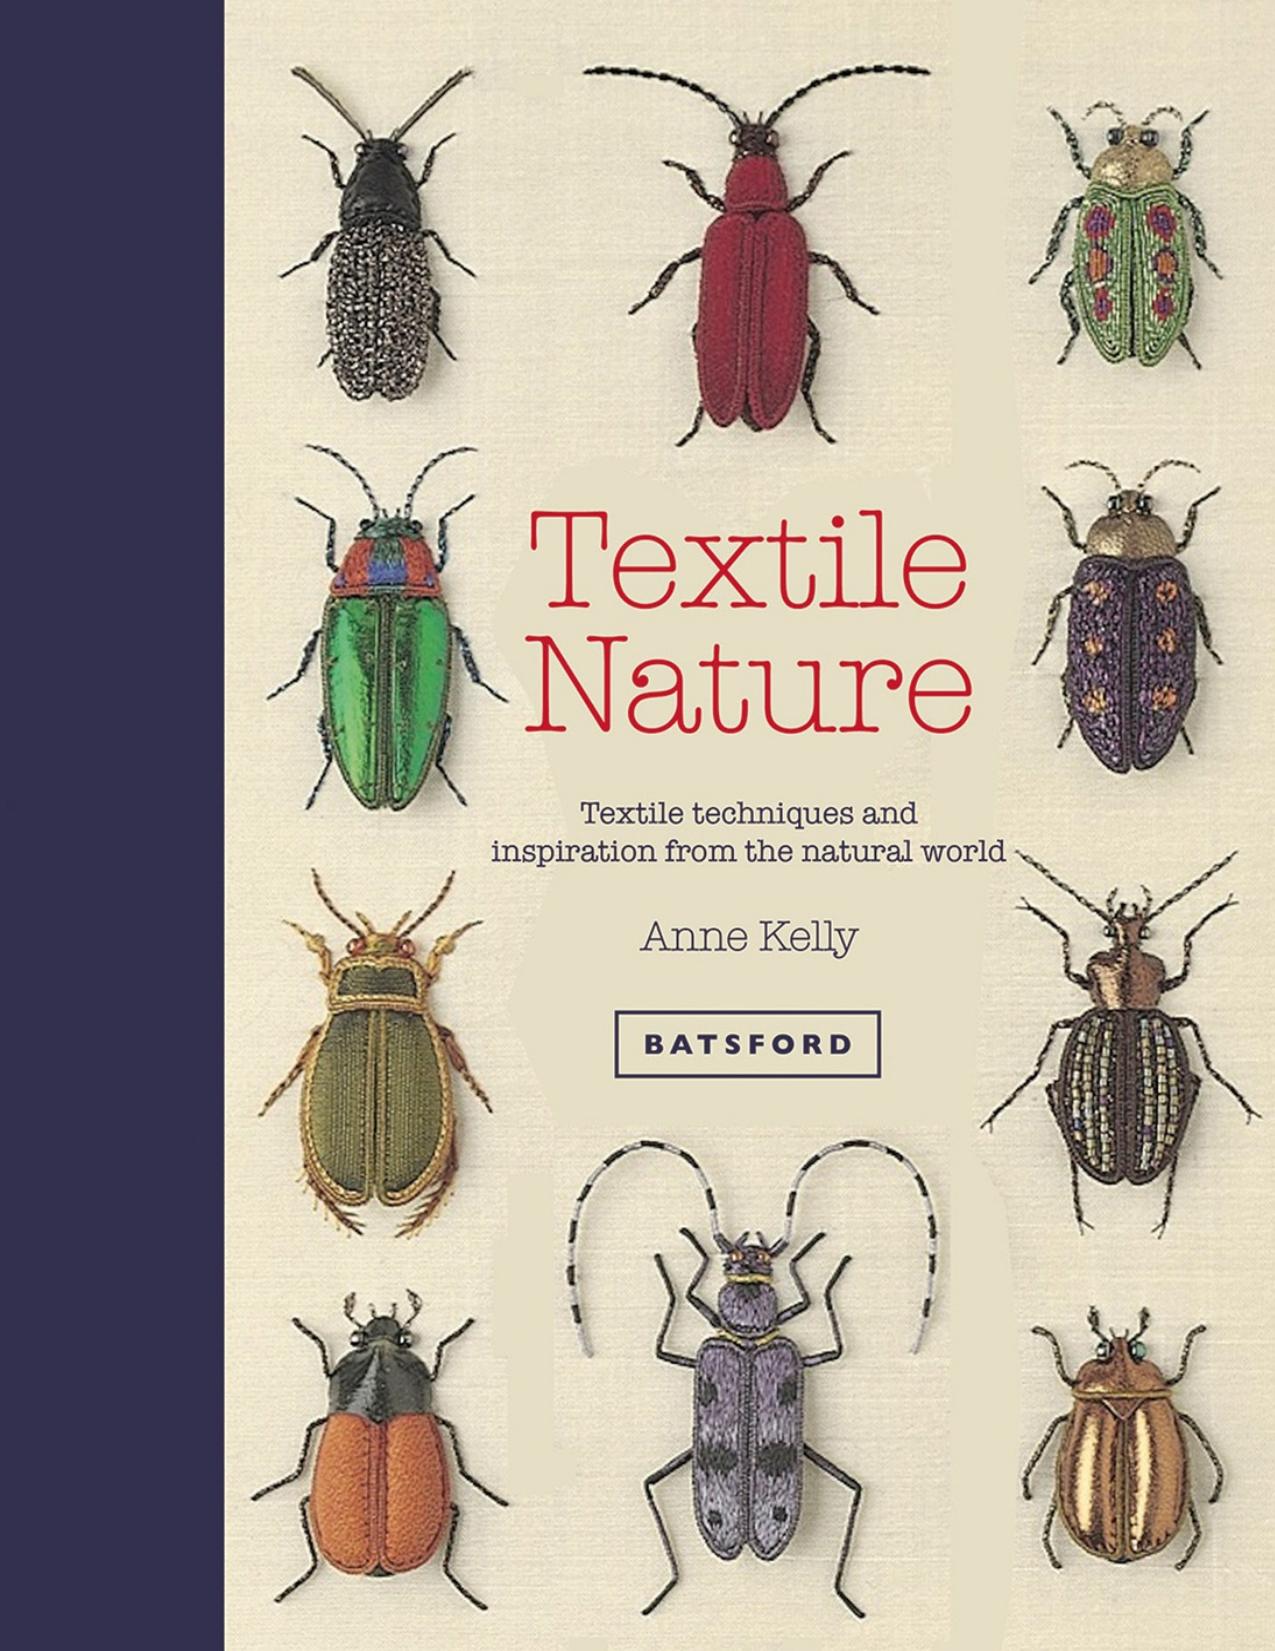 Textile Nature: Textile Techniques and Inspiration from the Natural World - PDFDrive.com